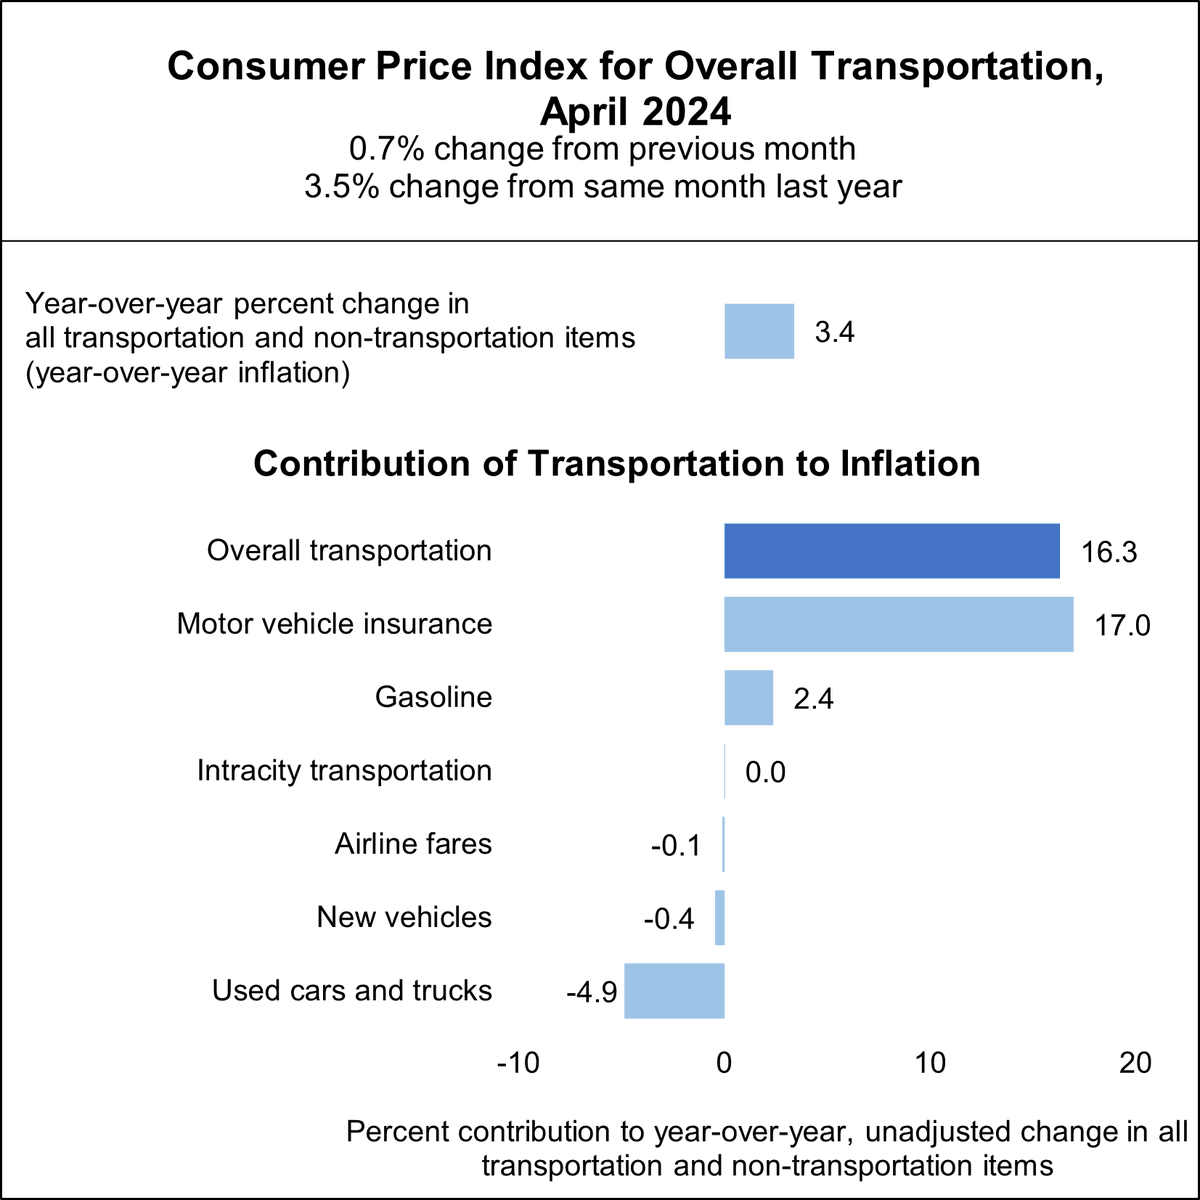 💵Transportation #Costs in April 2024 rose 0.7% from March 2024 and 3.5% from April 2023. #Transportation contributed 16.3% to overall 3.4% year-over-year increase in #Prices, per the Consumer Price Index #CPI. #Inflation💸 data.bts.gov/stories/s/f9jm… data.bts.gov/stories/s/jrb8…